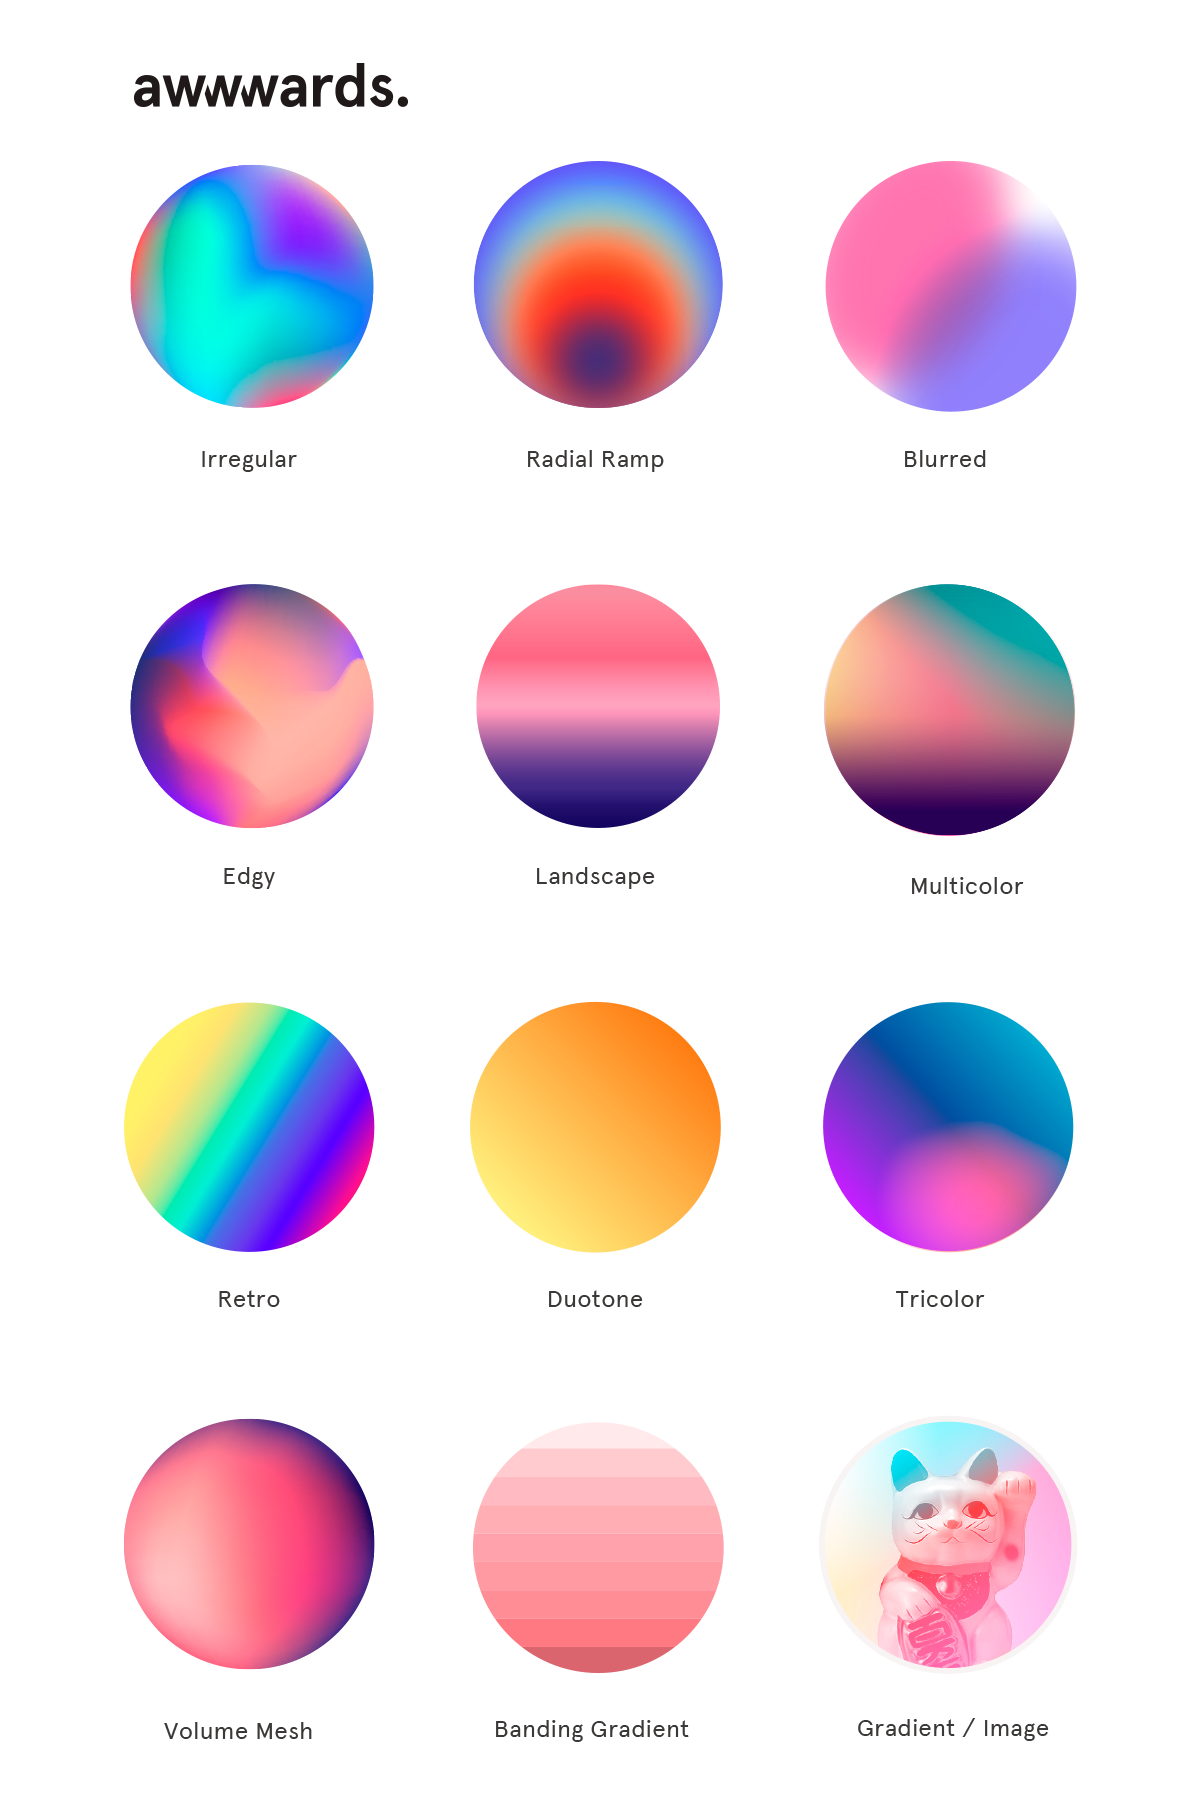 Using CSS gradients for background gradient images